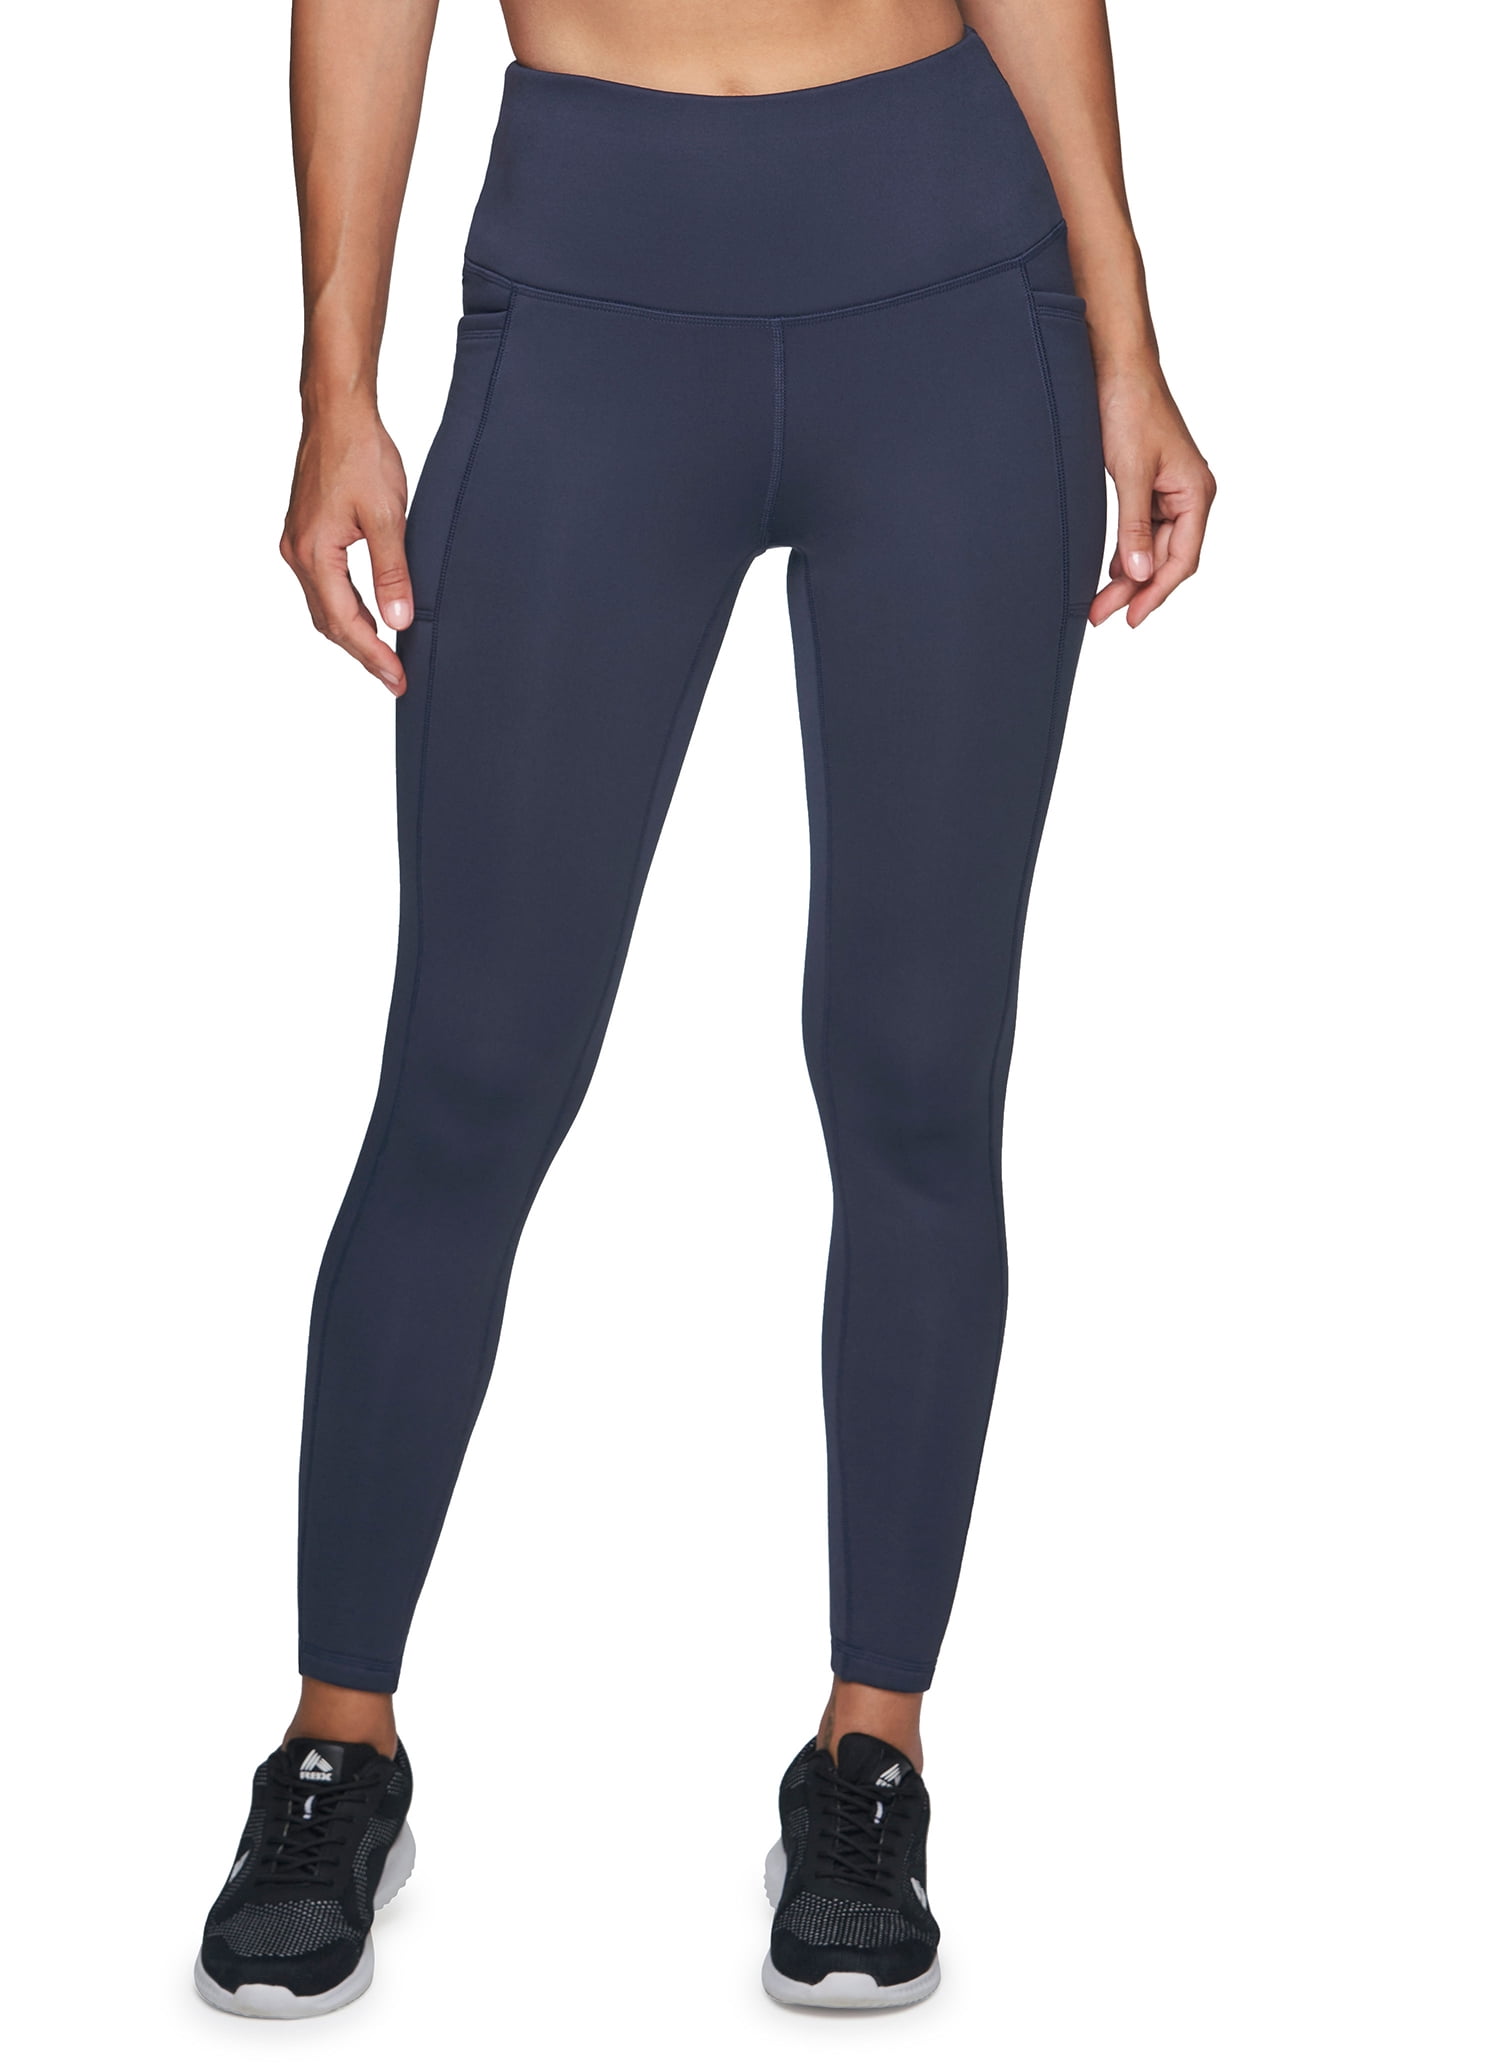 Avalanche Outdoor Supply Co Leggings Small Women's Fleece Lined